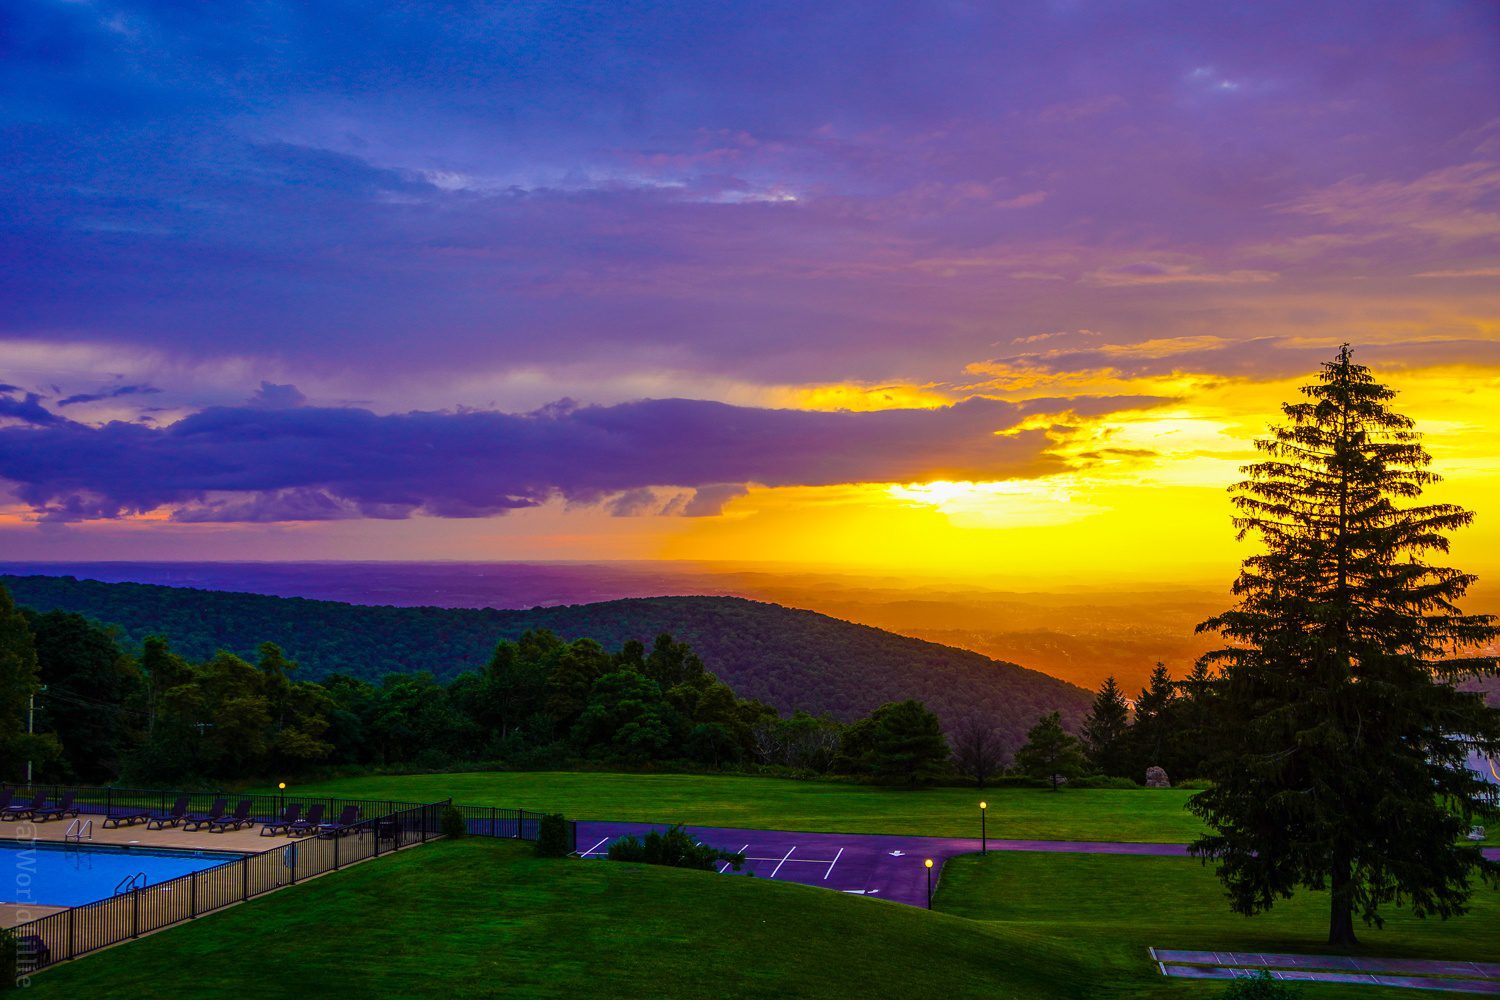 Sunset view from the Historic Summit Inn.